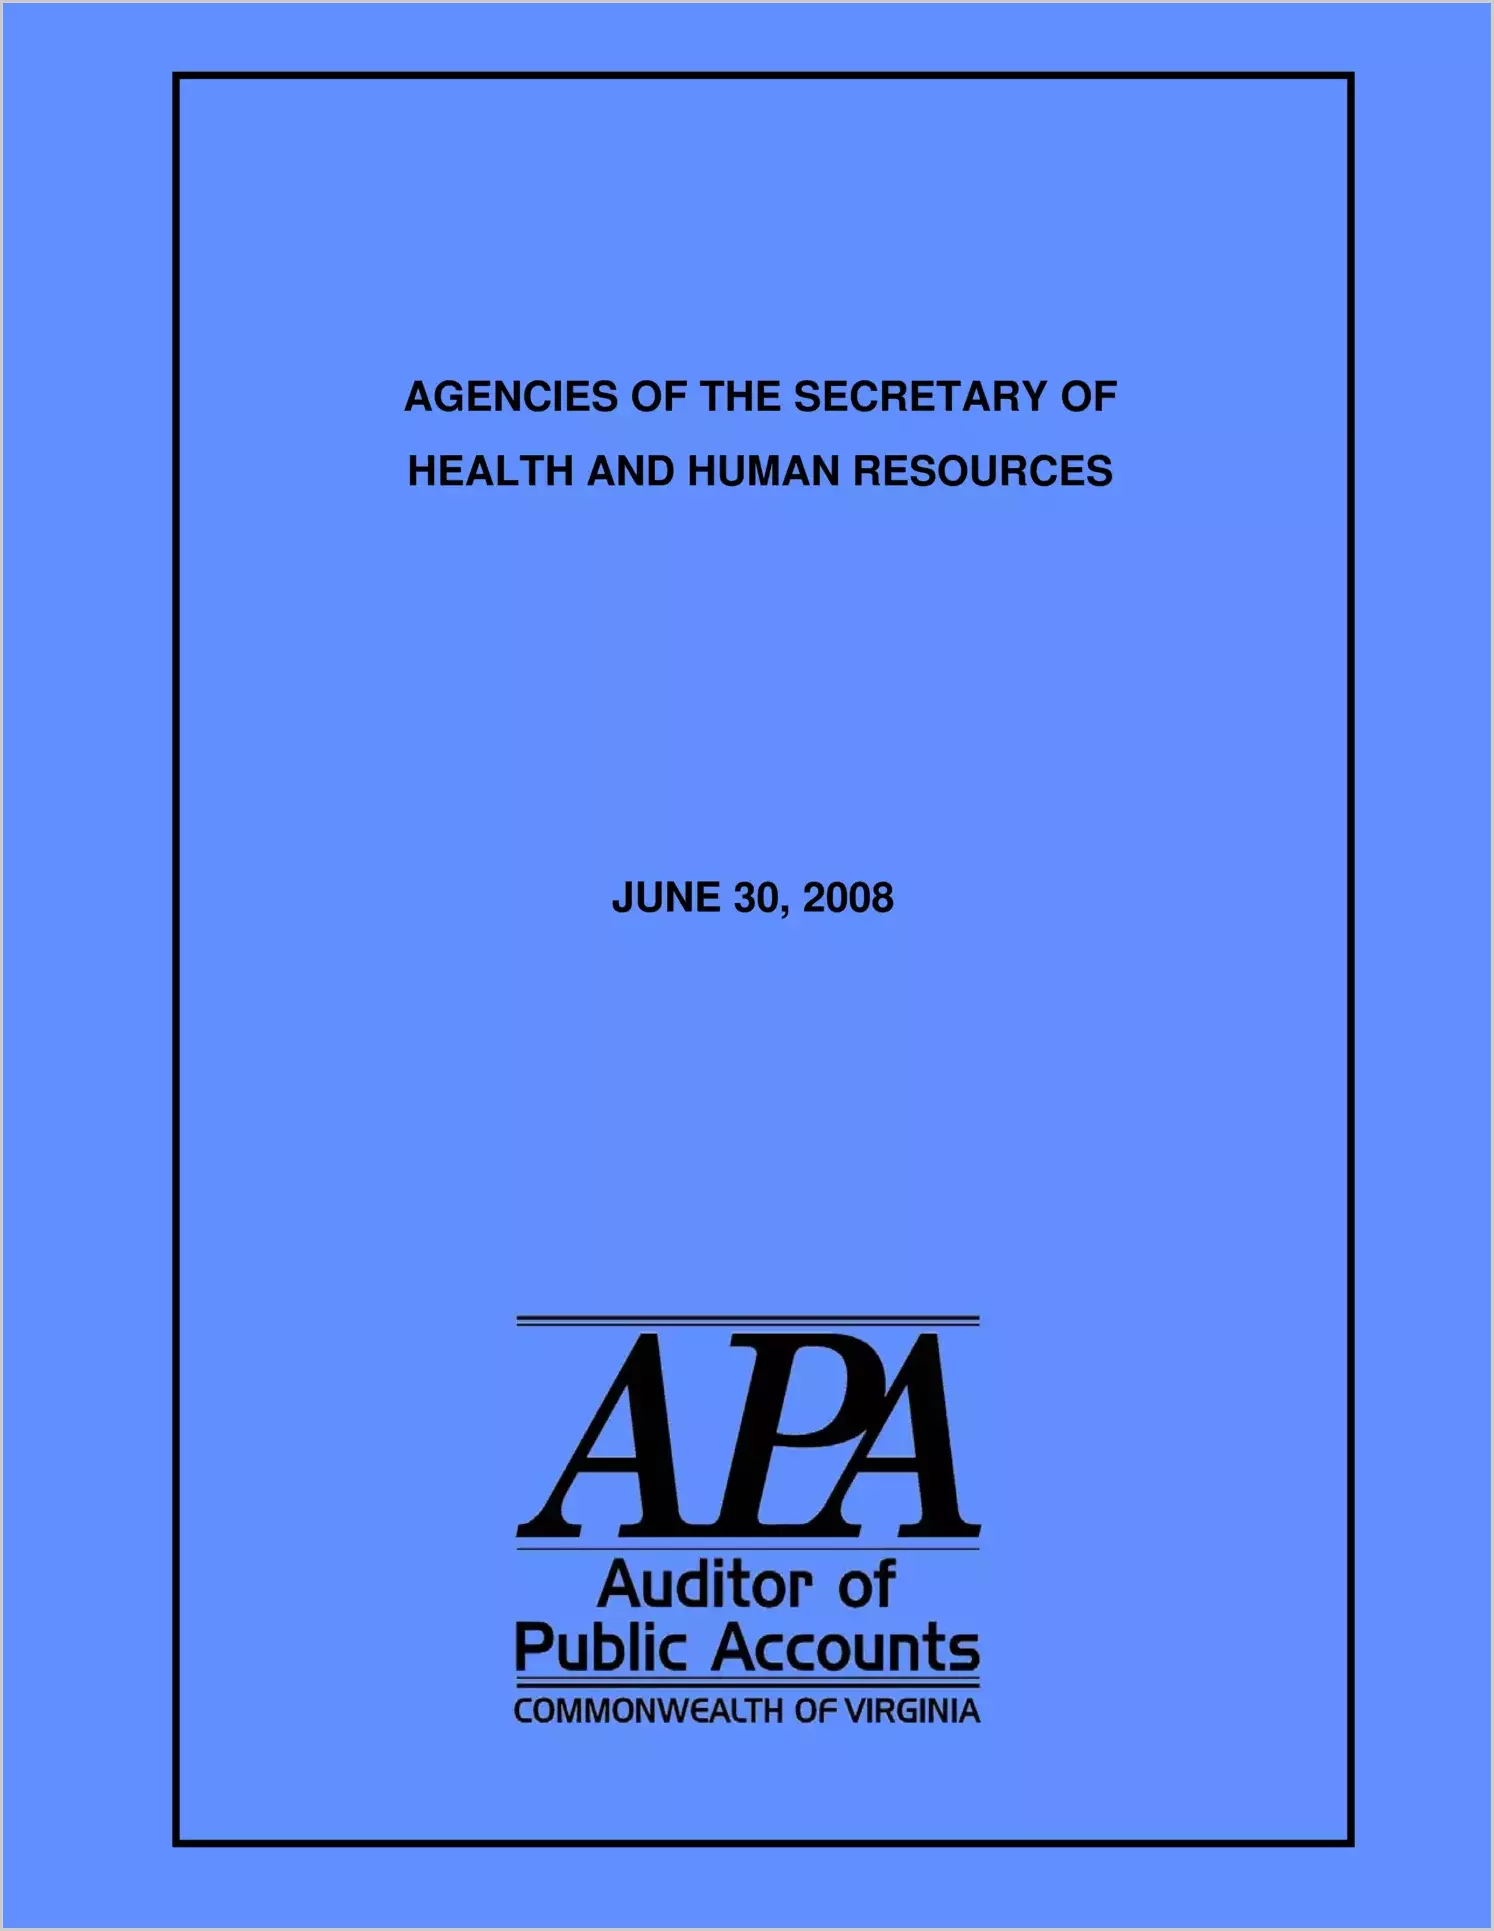 Agencies of the Secretary of Health and Human Resources - June 30, 2008